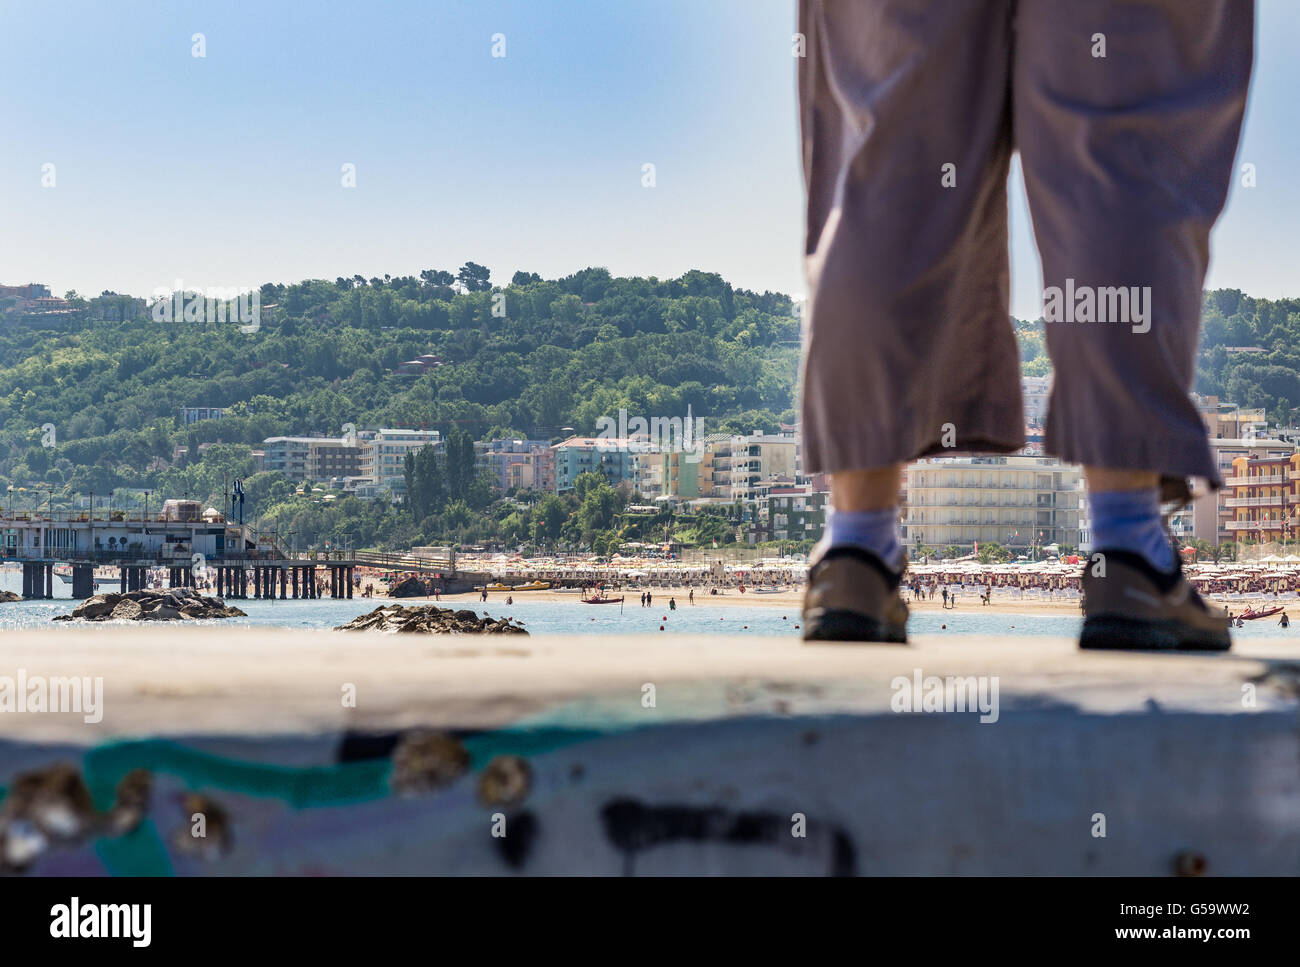 detail of legs with pants, sneakers and ankle socks on a Riviera resort background Stock Photo